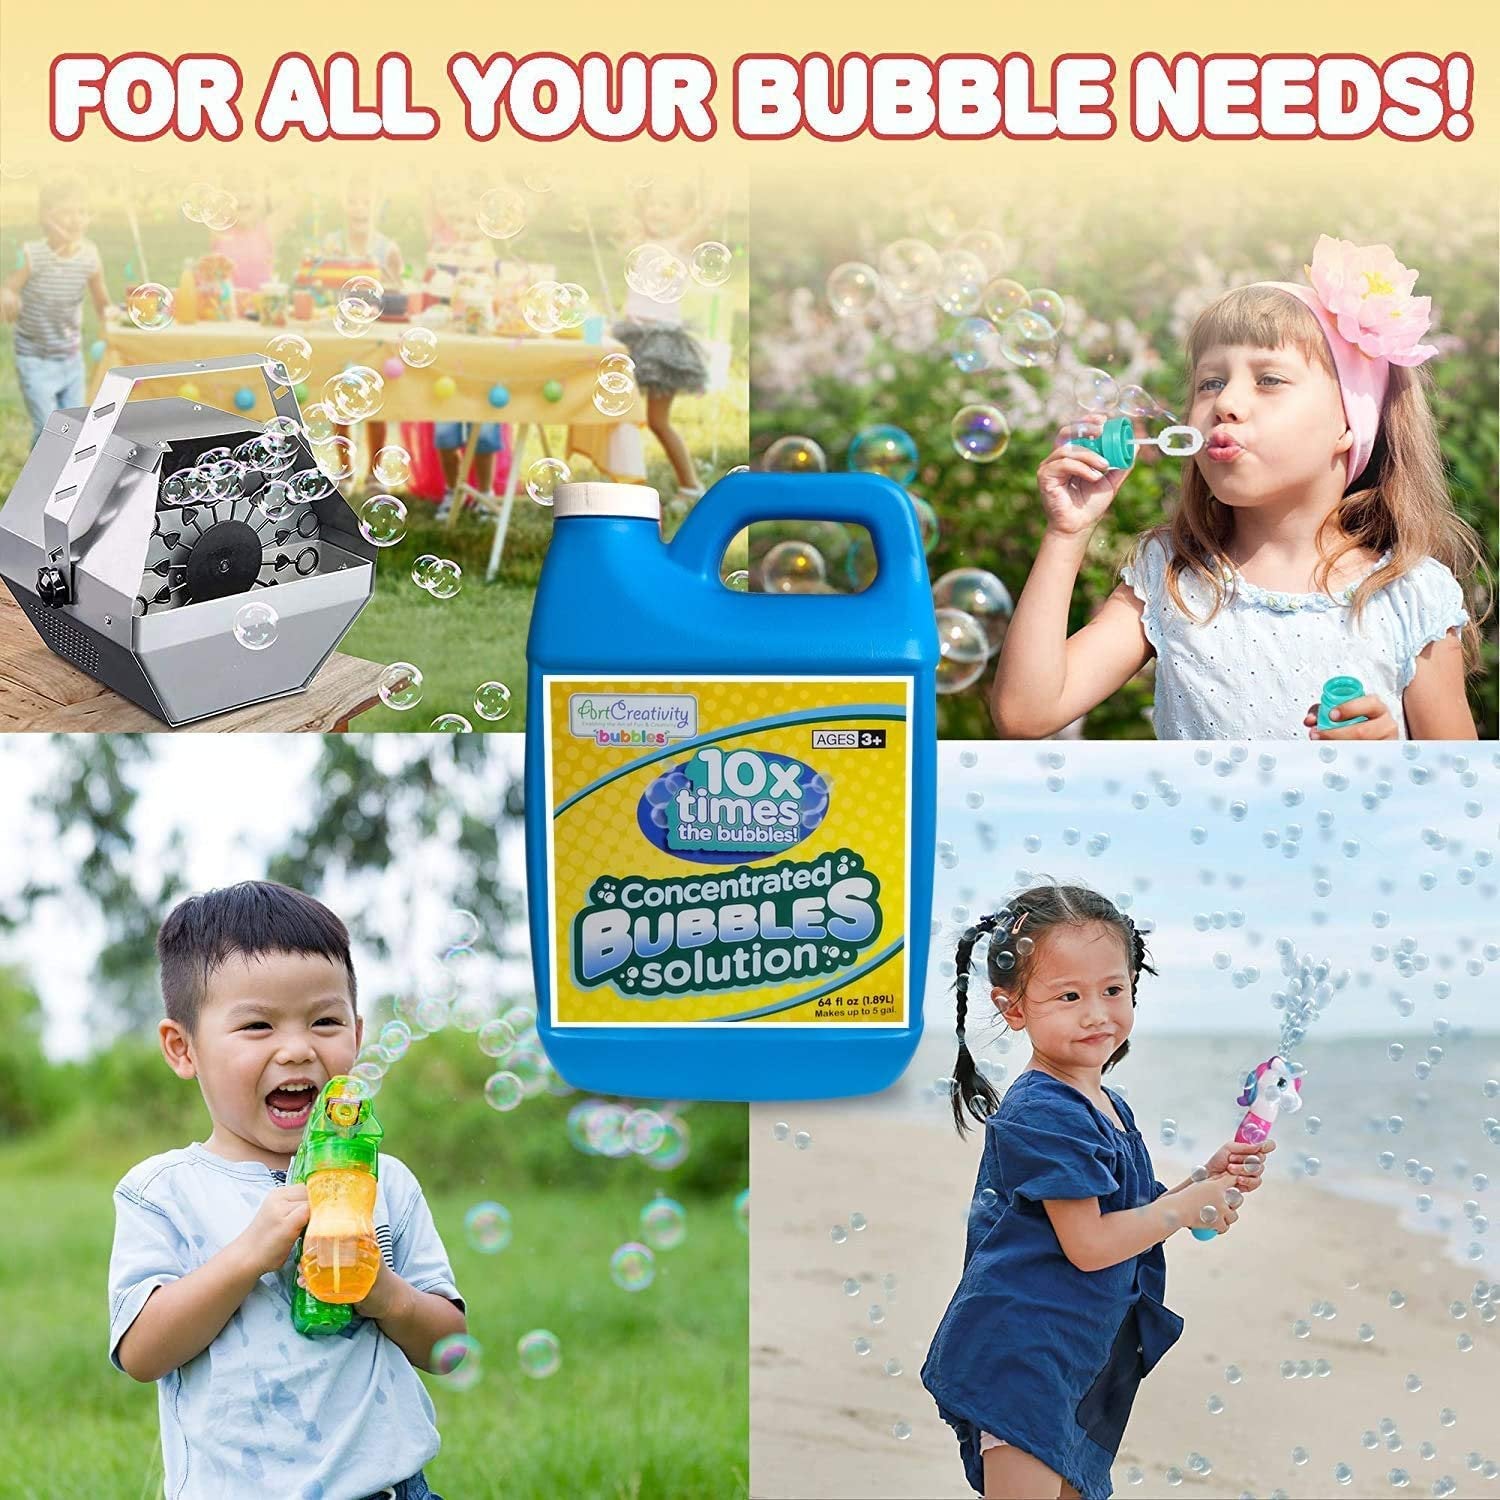 Concentrated Bubble Solution Refill for Bubble Toys, Huge 64oz Concentrated Liquid, Makes Up to 5 Gallon, Non-Toxic Liquid for Bubble Machine, Toy Guns, Wands, Bubble Lawn Mower and More